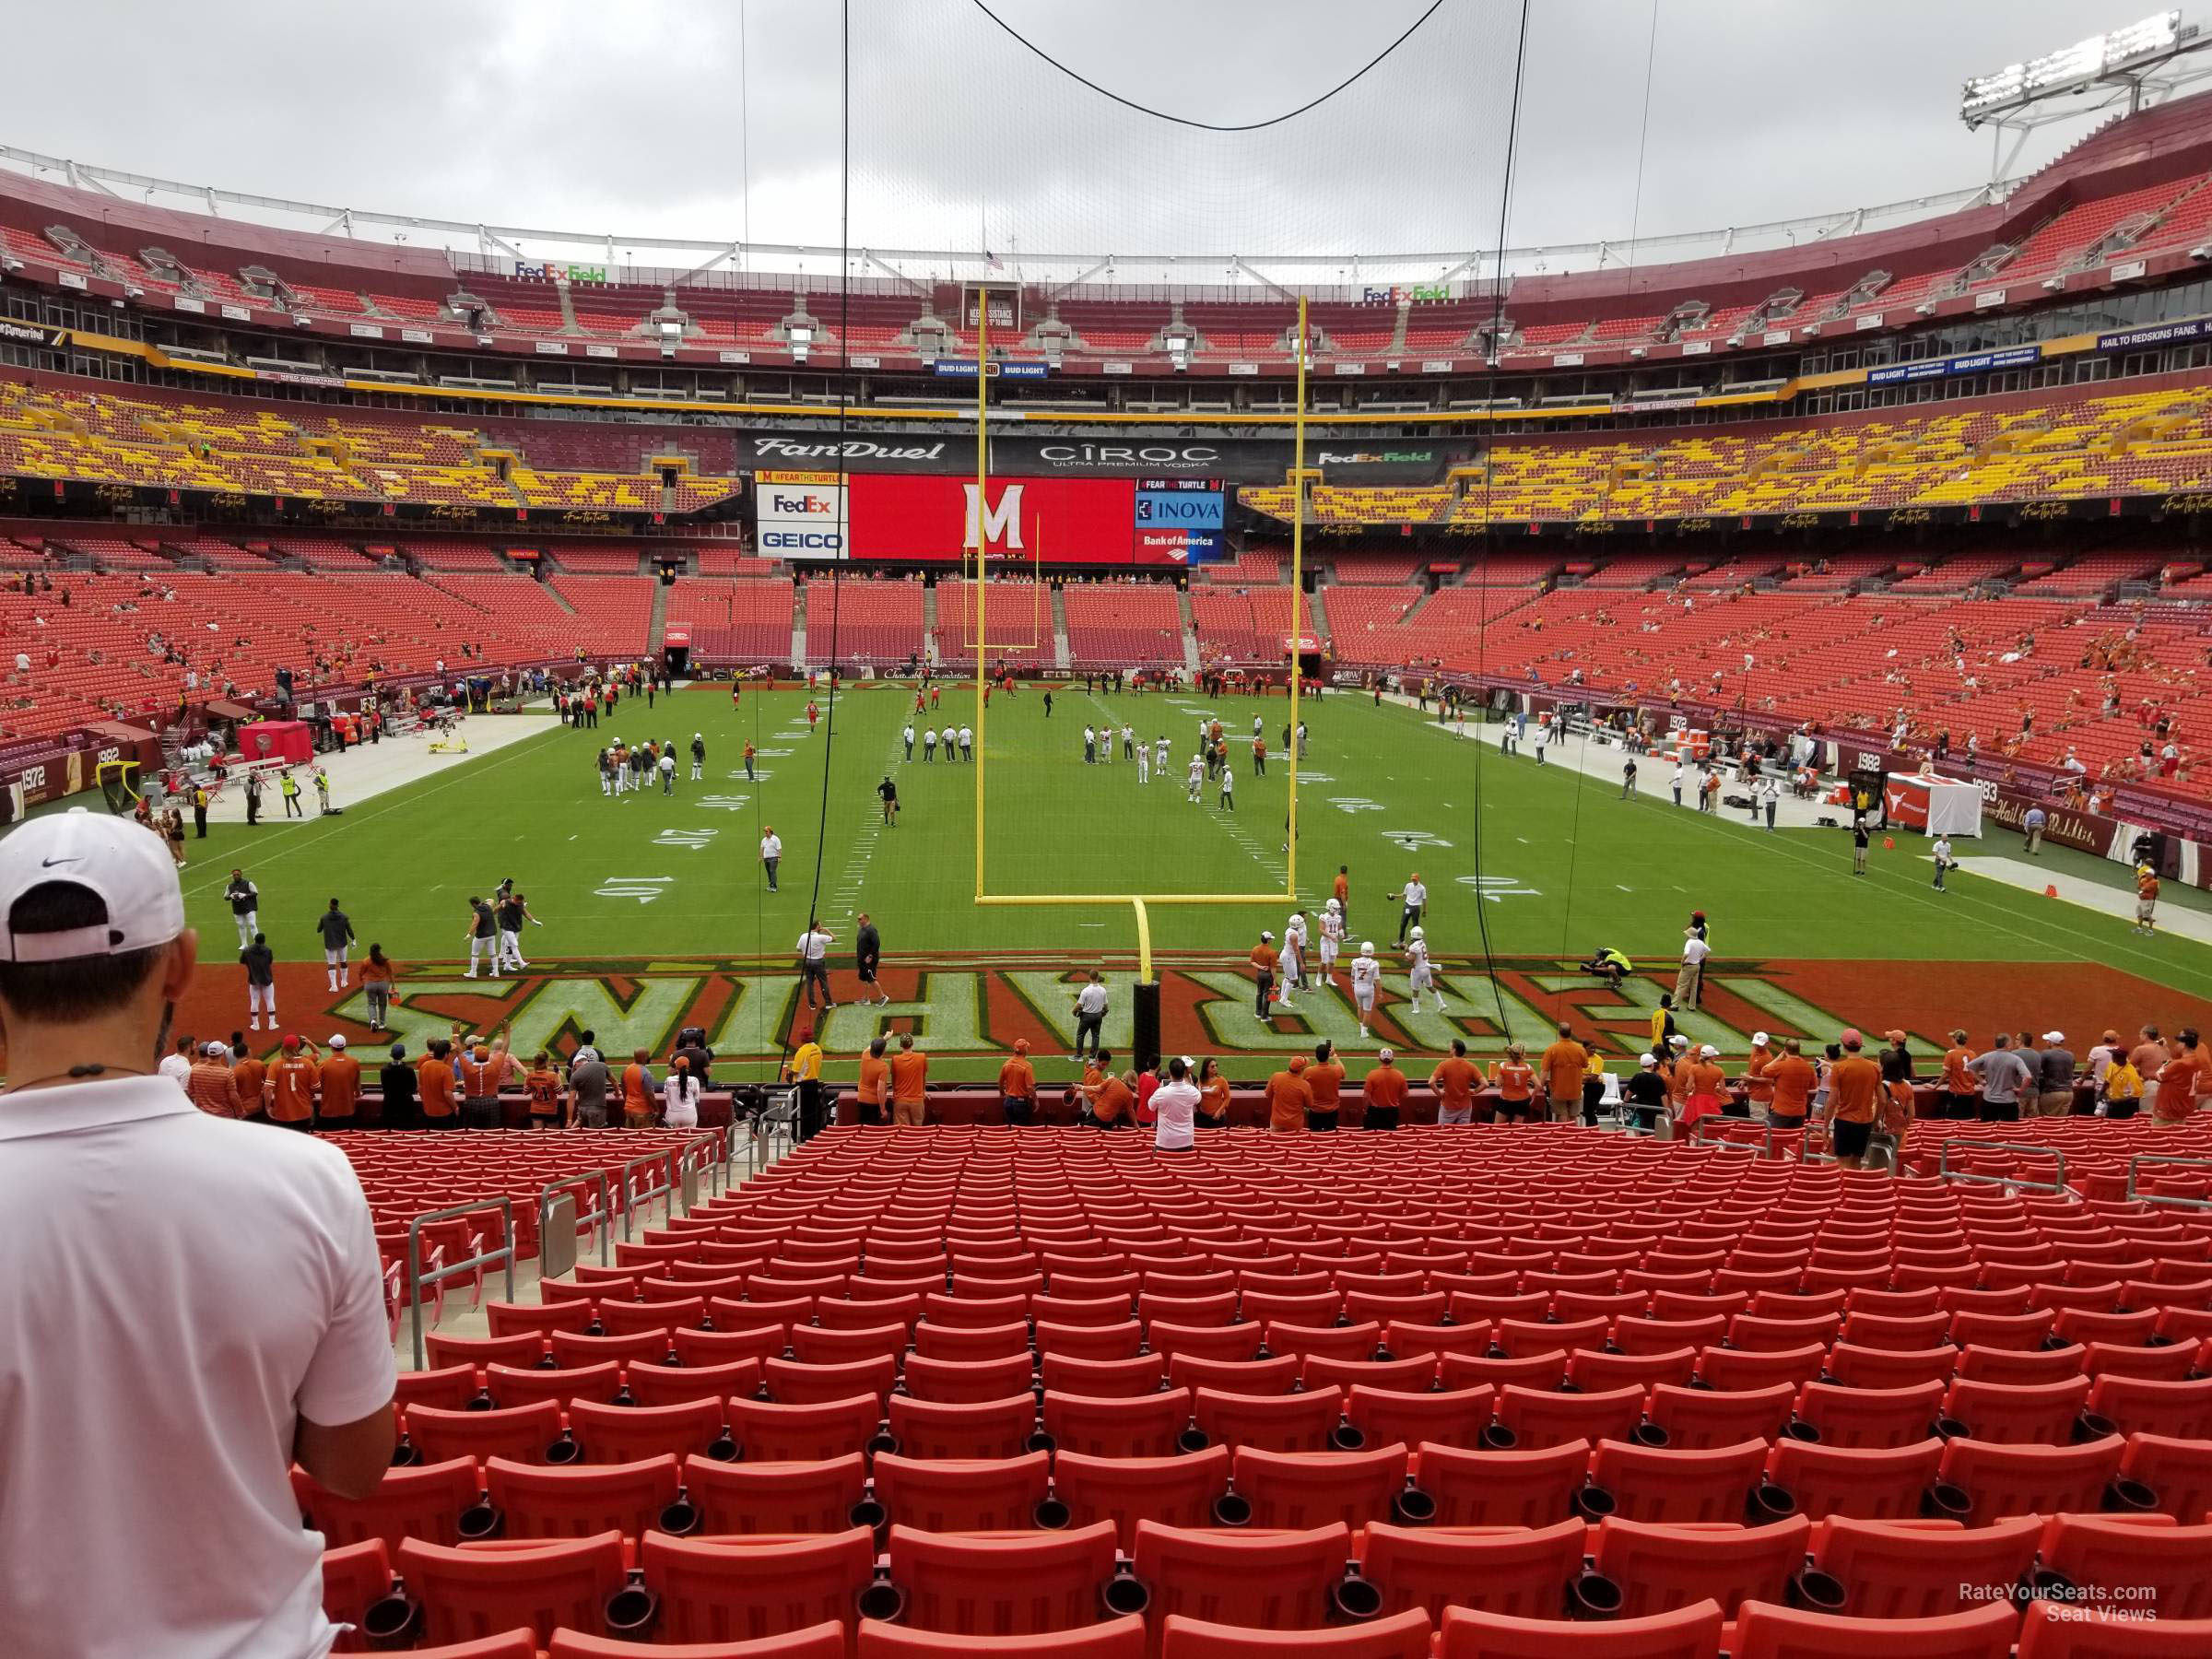 section 232, row 1 seat view  - fedexfield